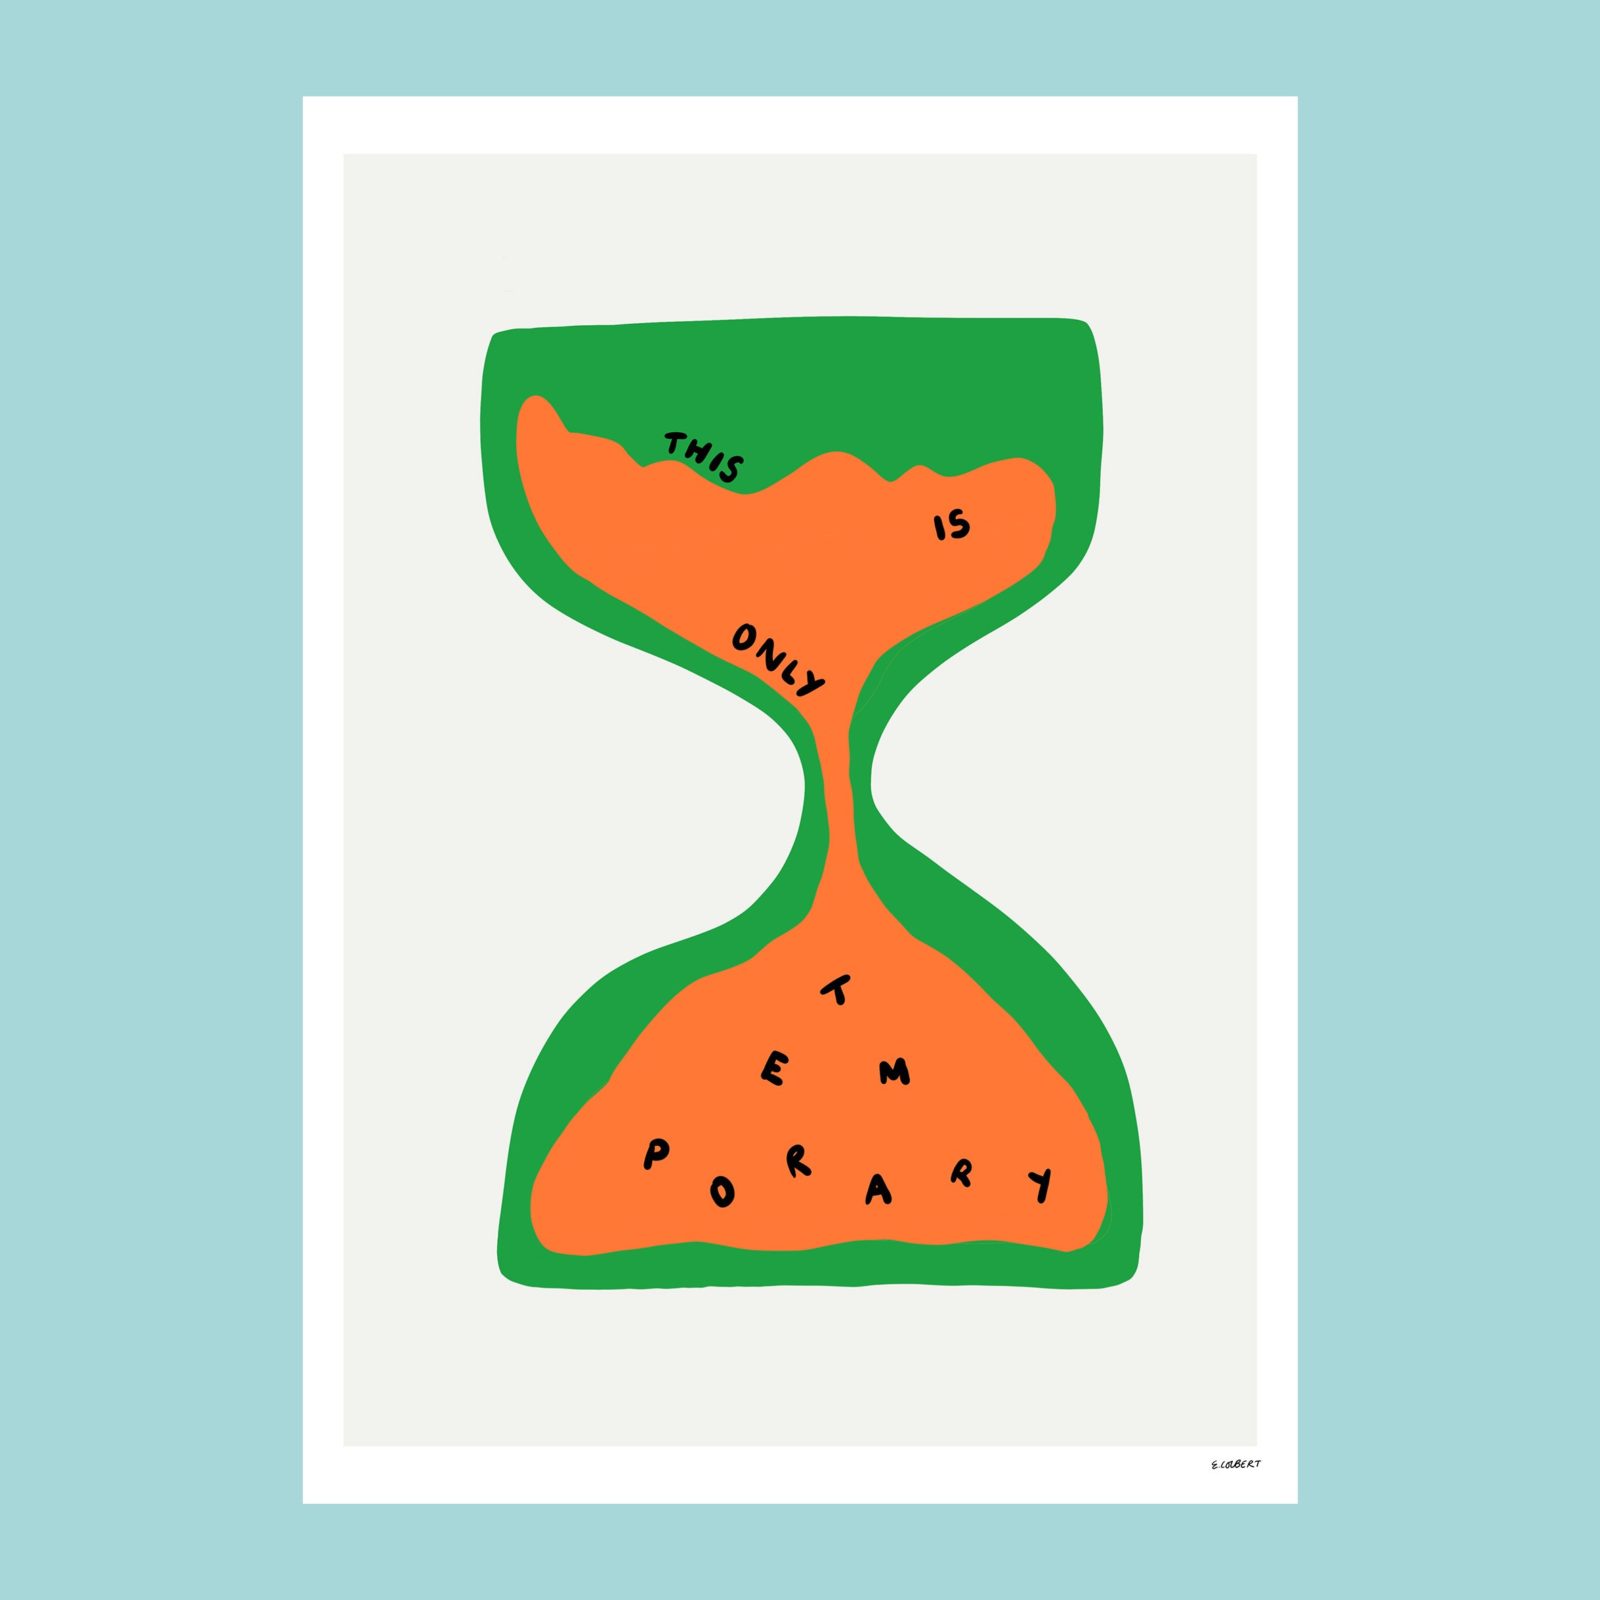 Simplistic illustration of an hourglass which is green with orange sand filtering through it. In the top half of the hourglass are the words ;This is only' and in the bottom half the letters of the word 'Temporary' are scattered.